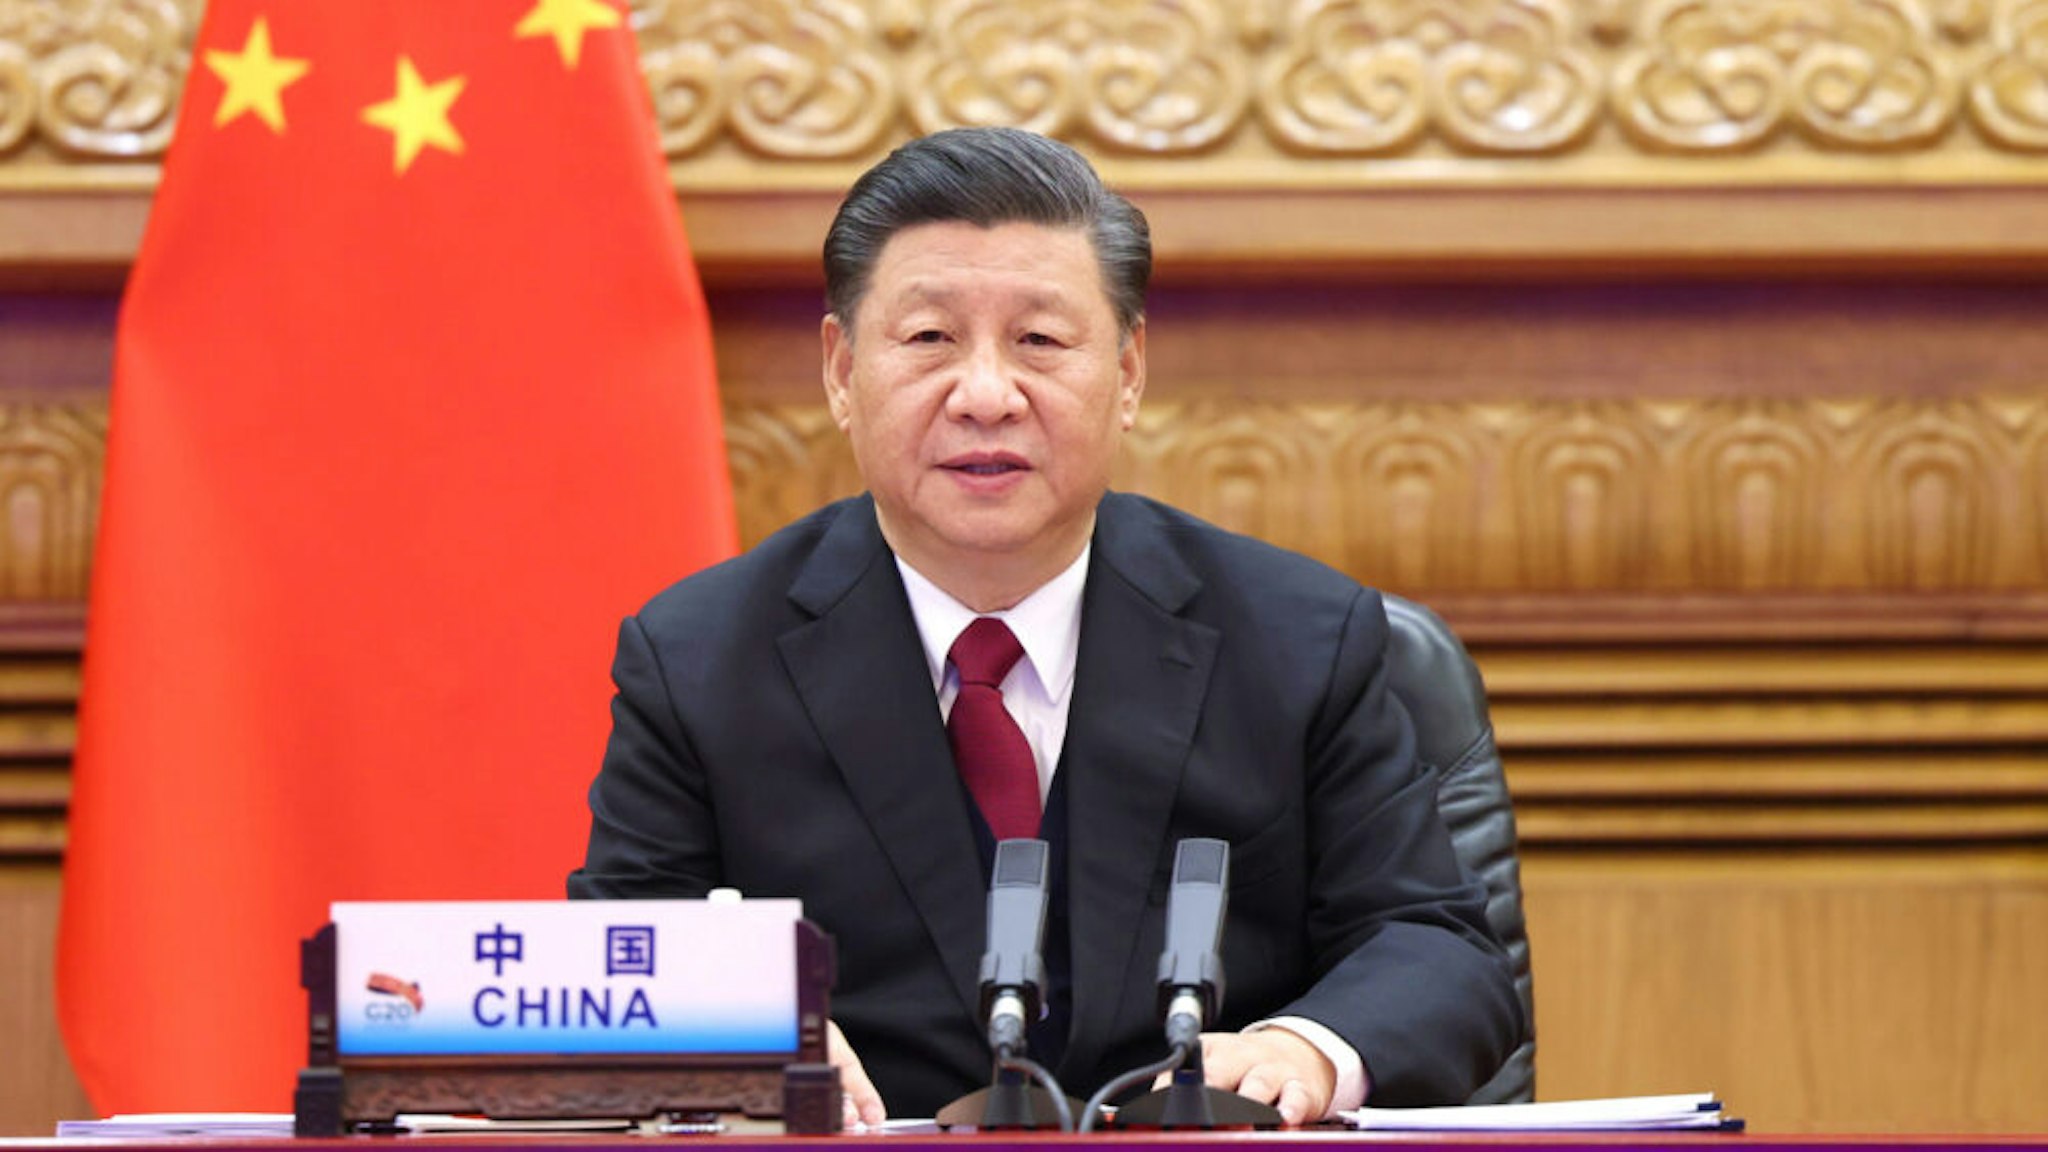 BEIJING, Nov. 22, 2020 -- Chinese President Xi Jinping attends Session II of the 15th G20 Leaders' Summit via video link in Beijing, capital of China, Nov. 22, 2020.